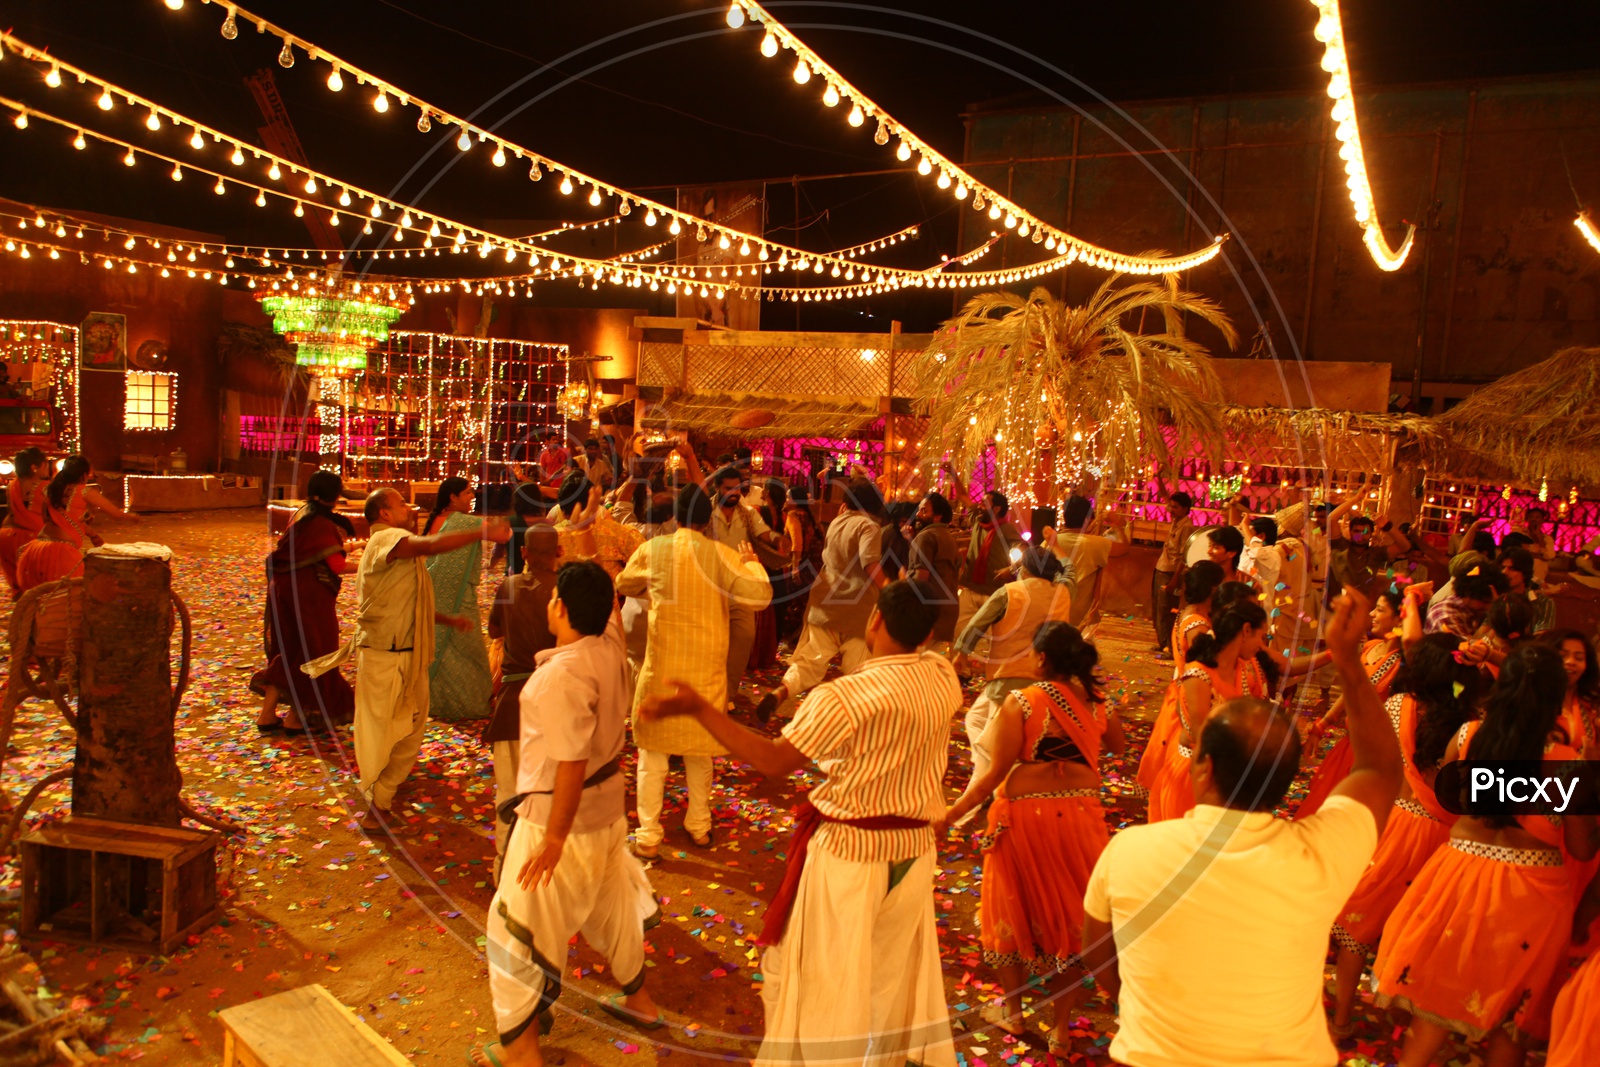 Villagers Dancing In Happiness in a Public Event